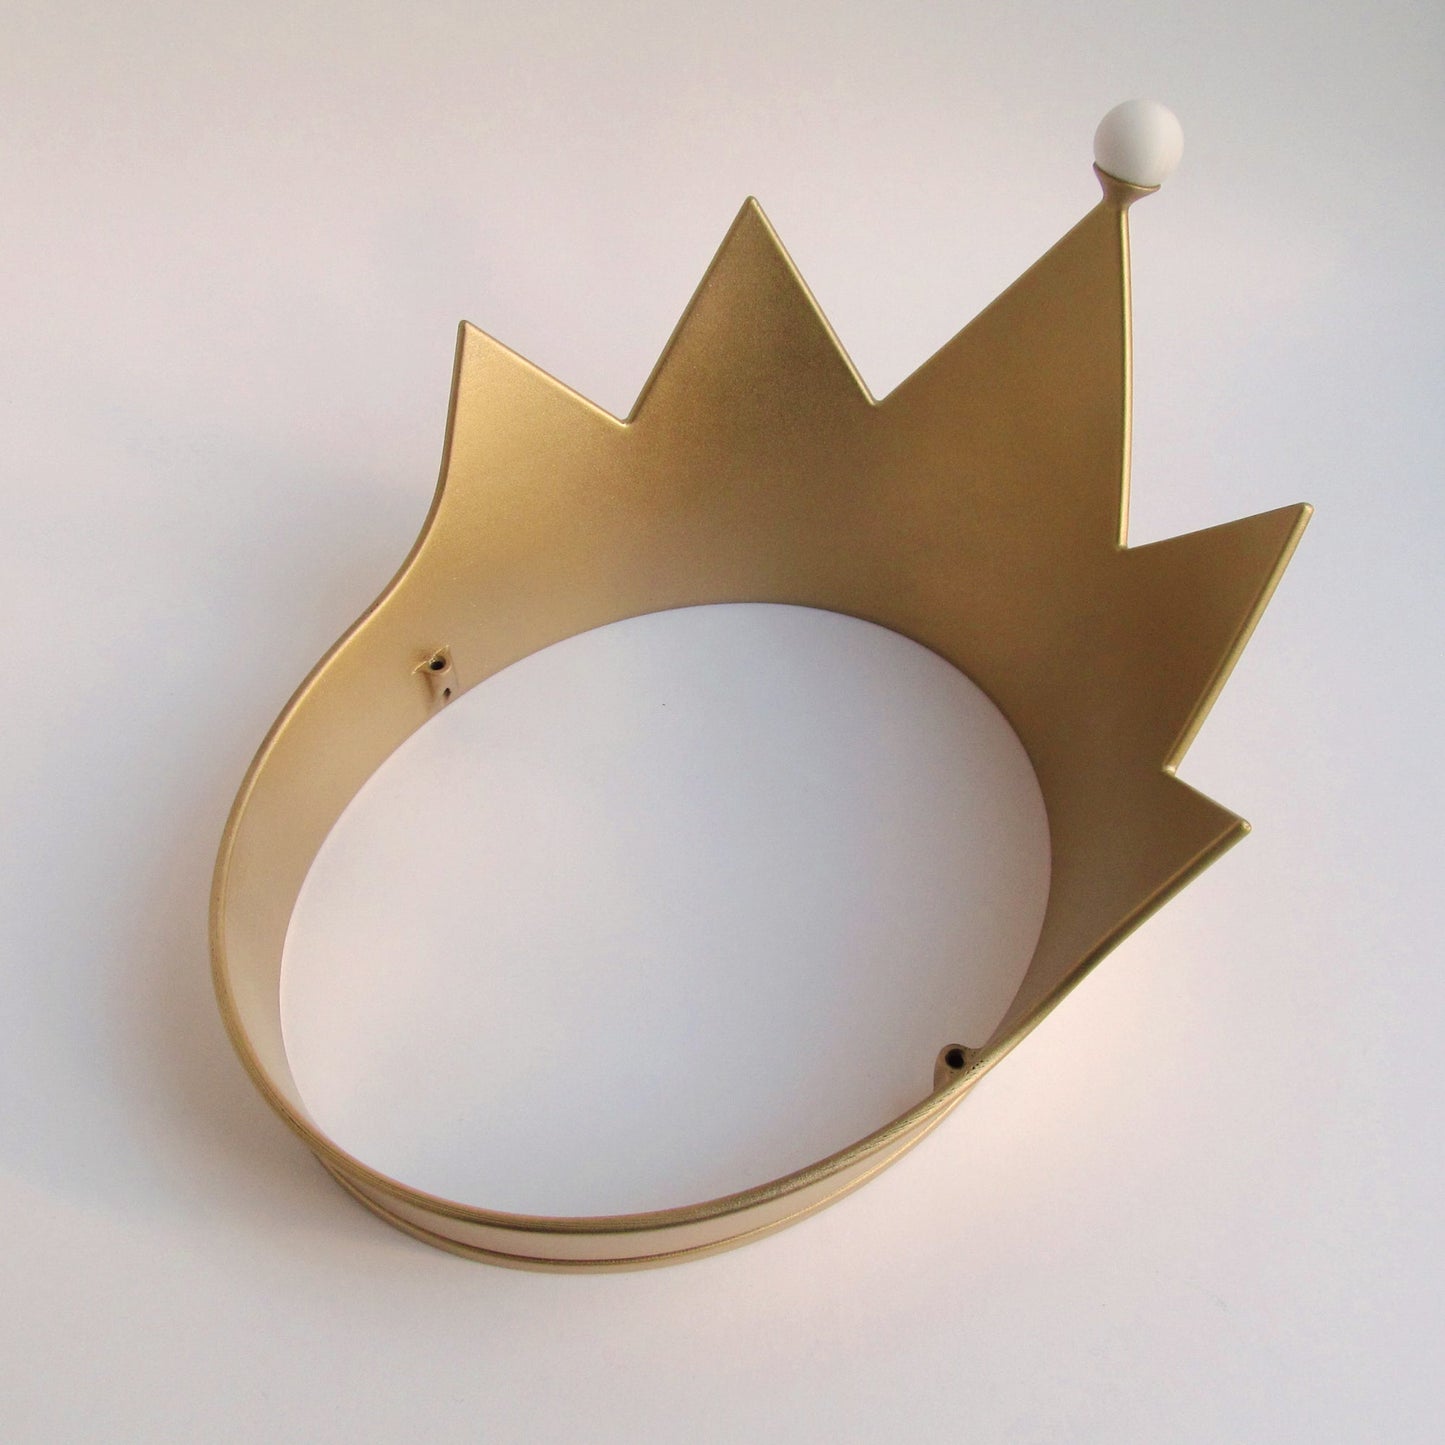 Evil Queen accessories: Crown and Brooch